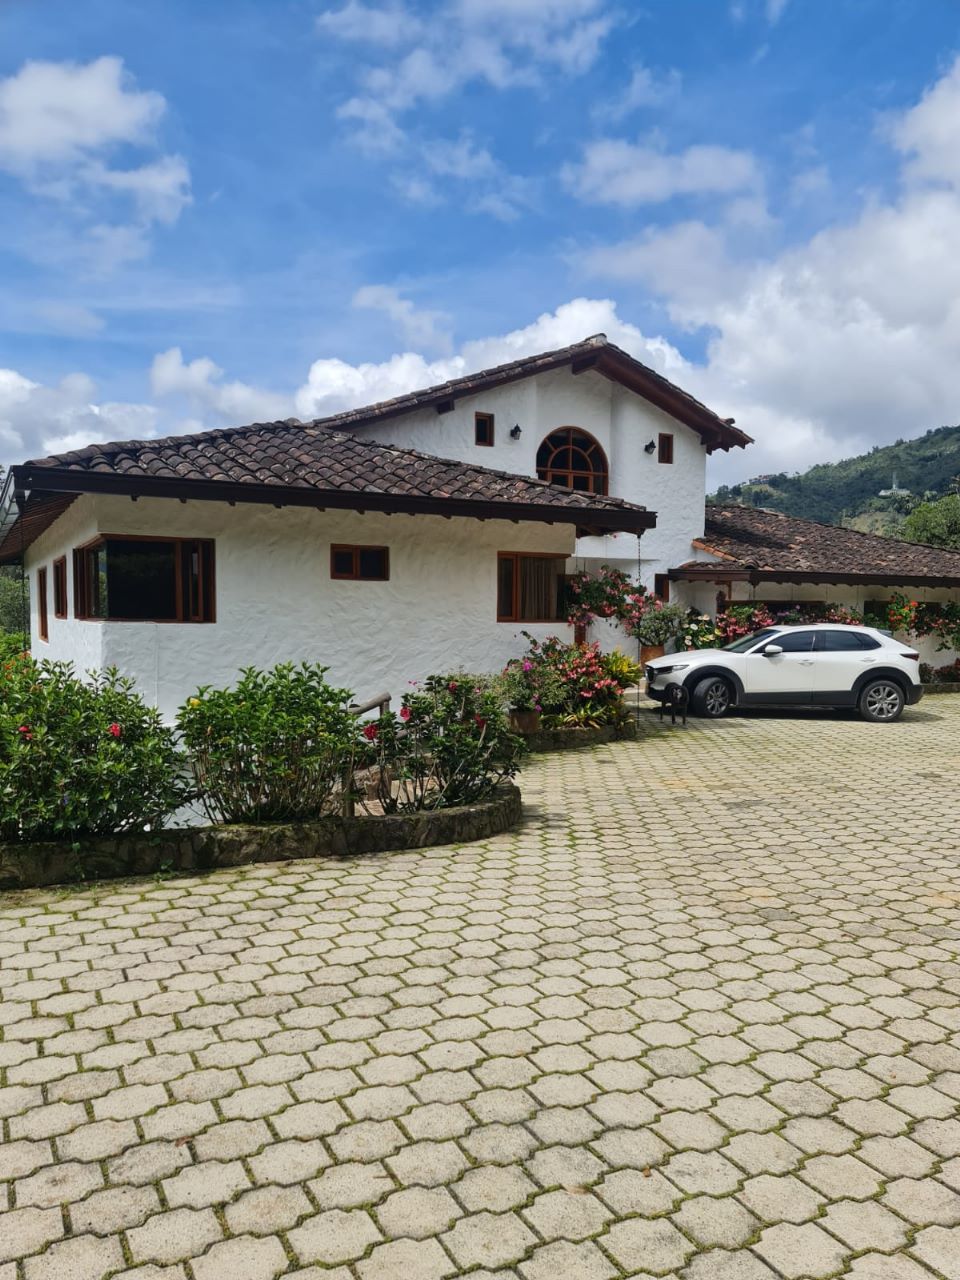 Lovely El Retiro Gated Community Finca With Soothing Lake Views, Covered Porch Space, and High Ceilings On 3.47 Acres